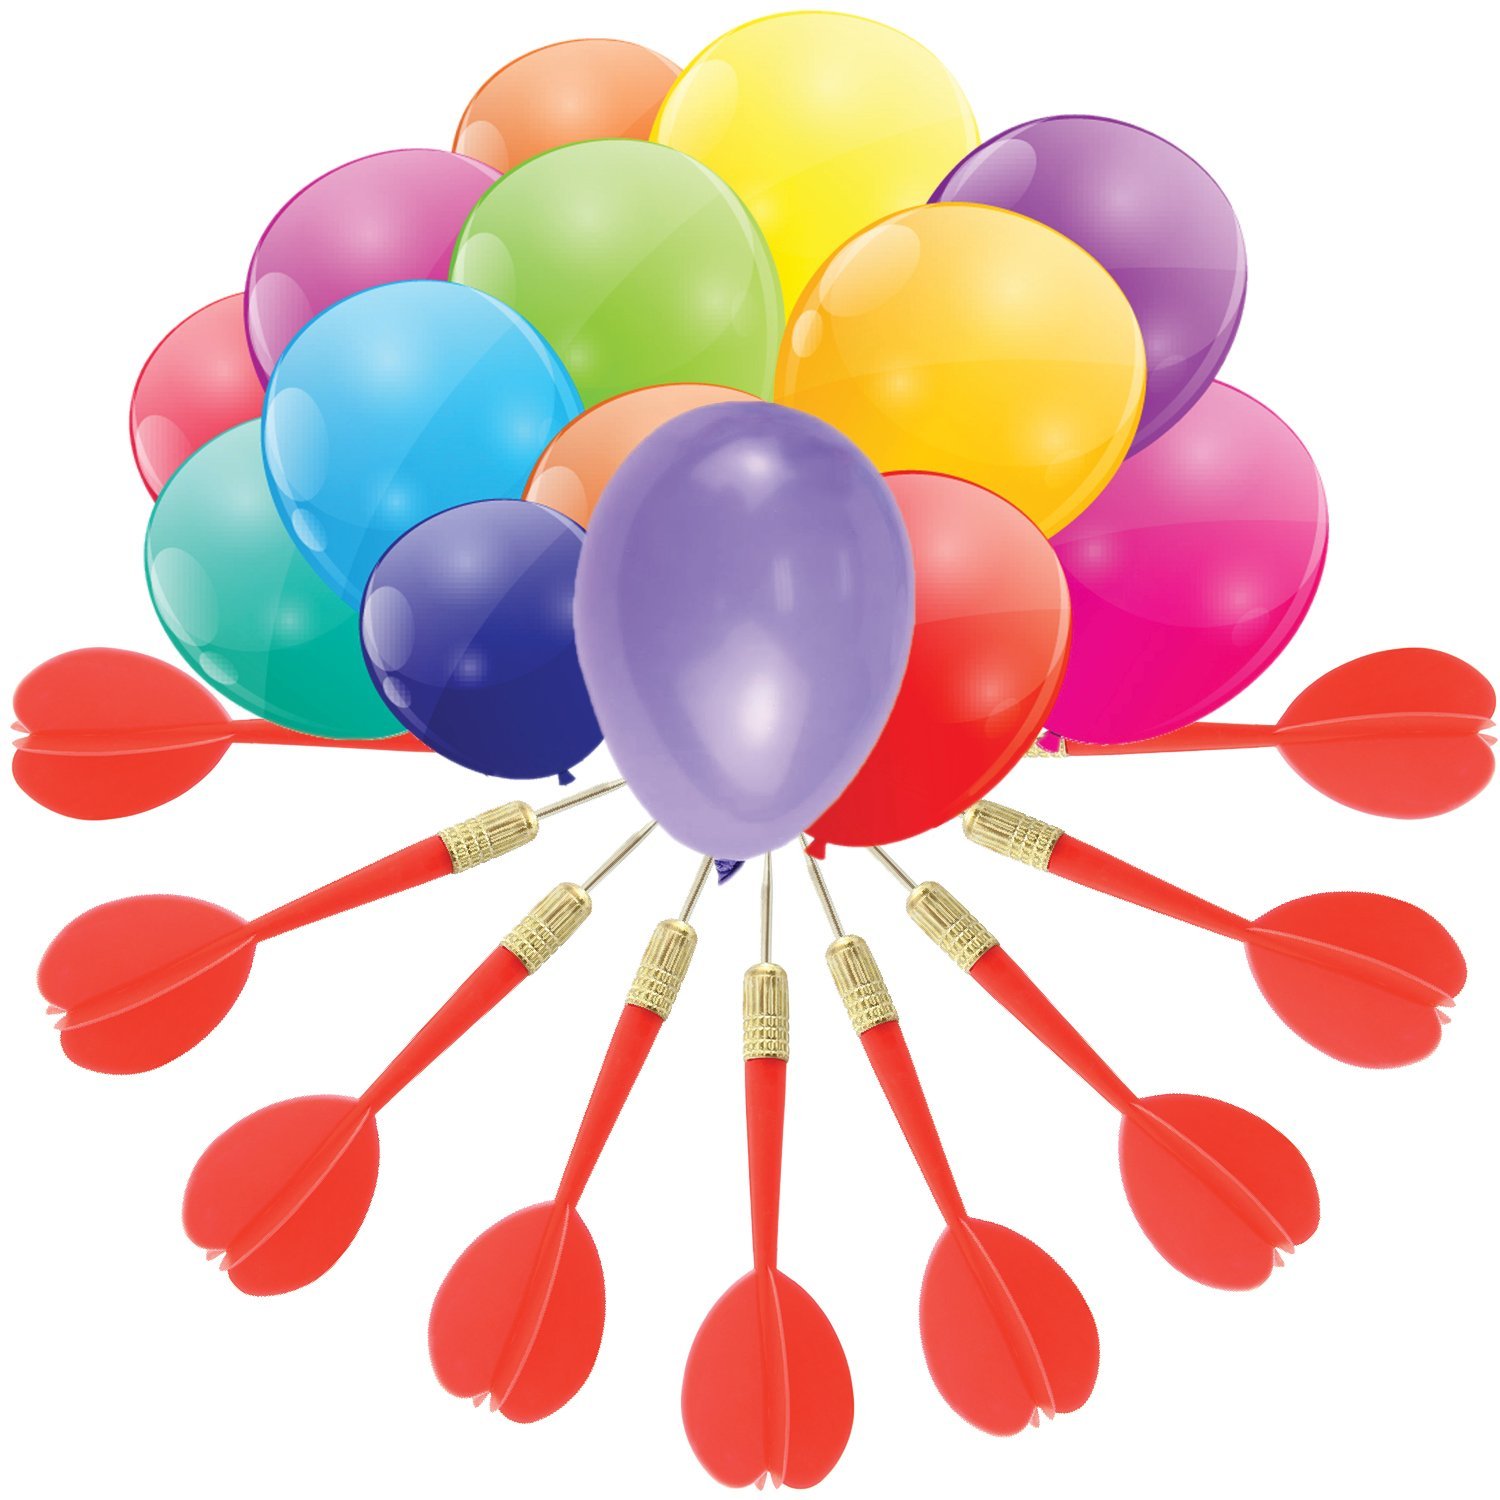 red balloon clipart png - Clip Art Library.